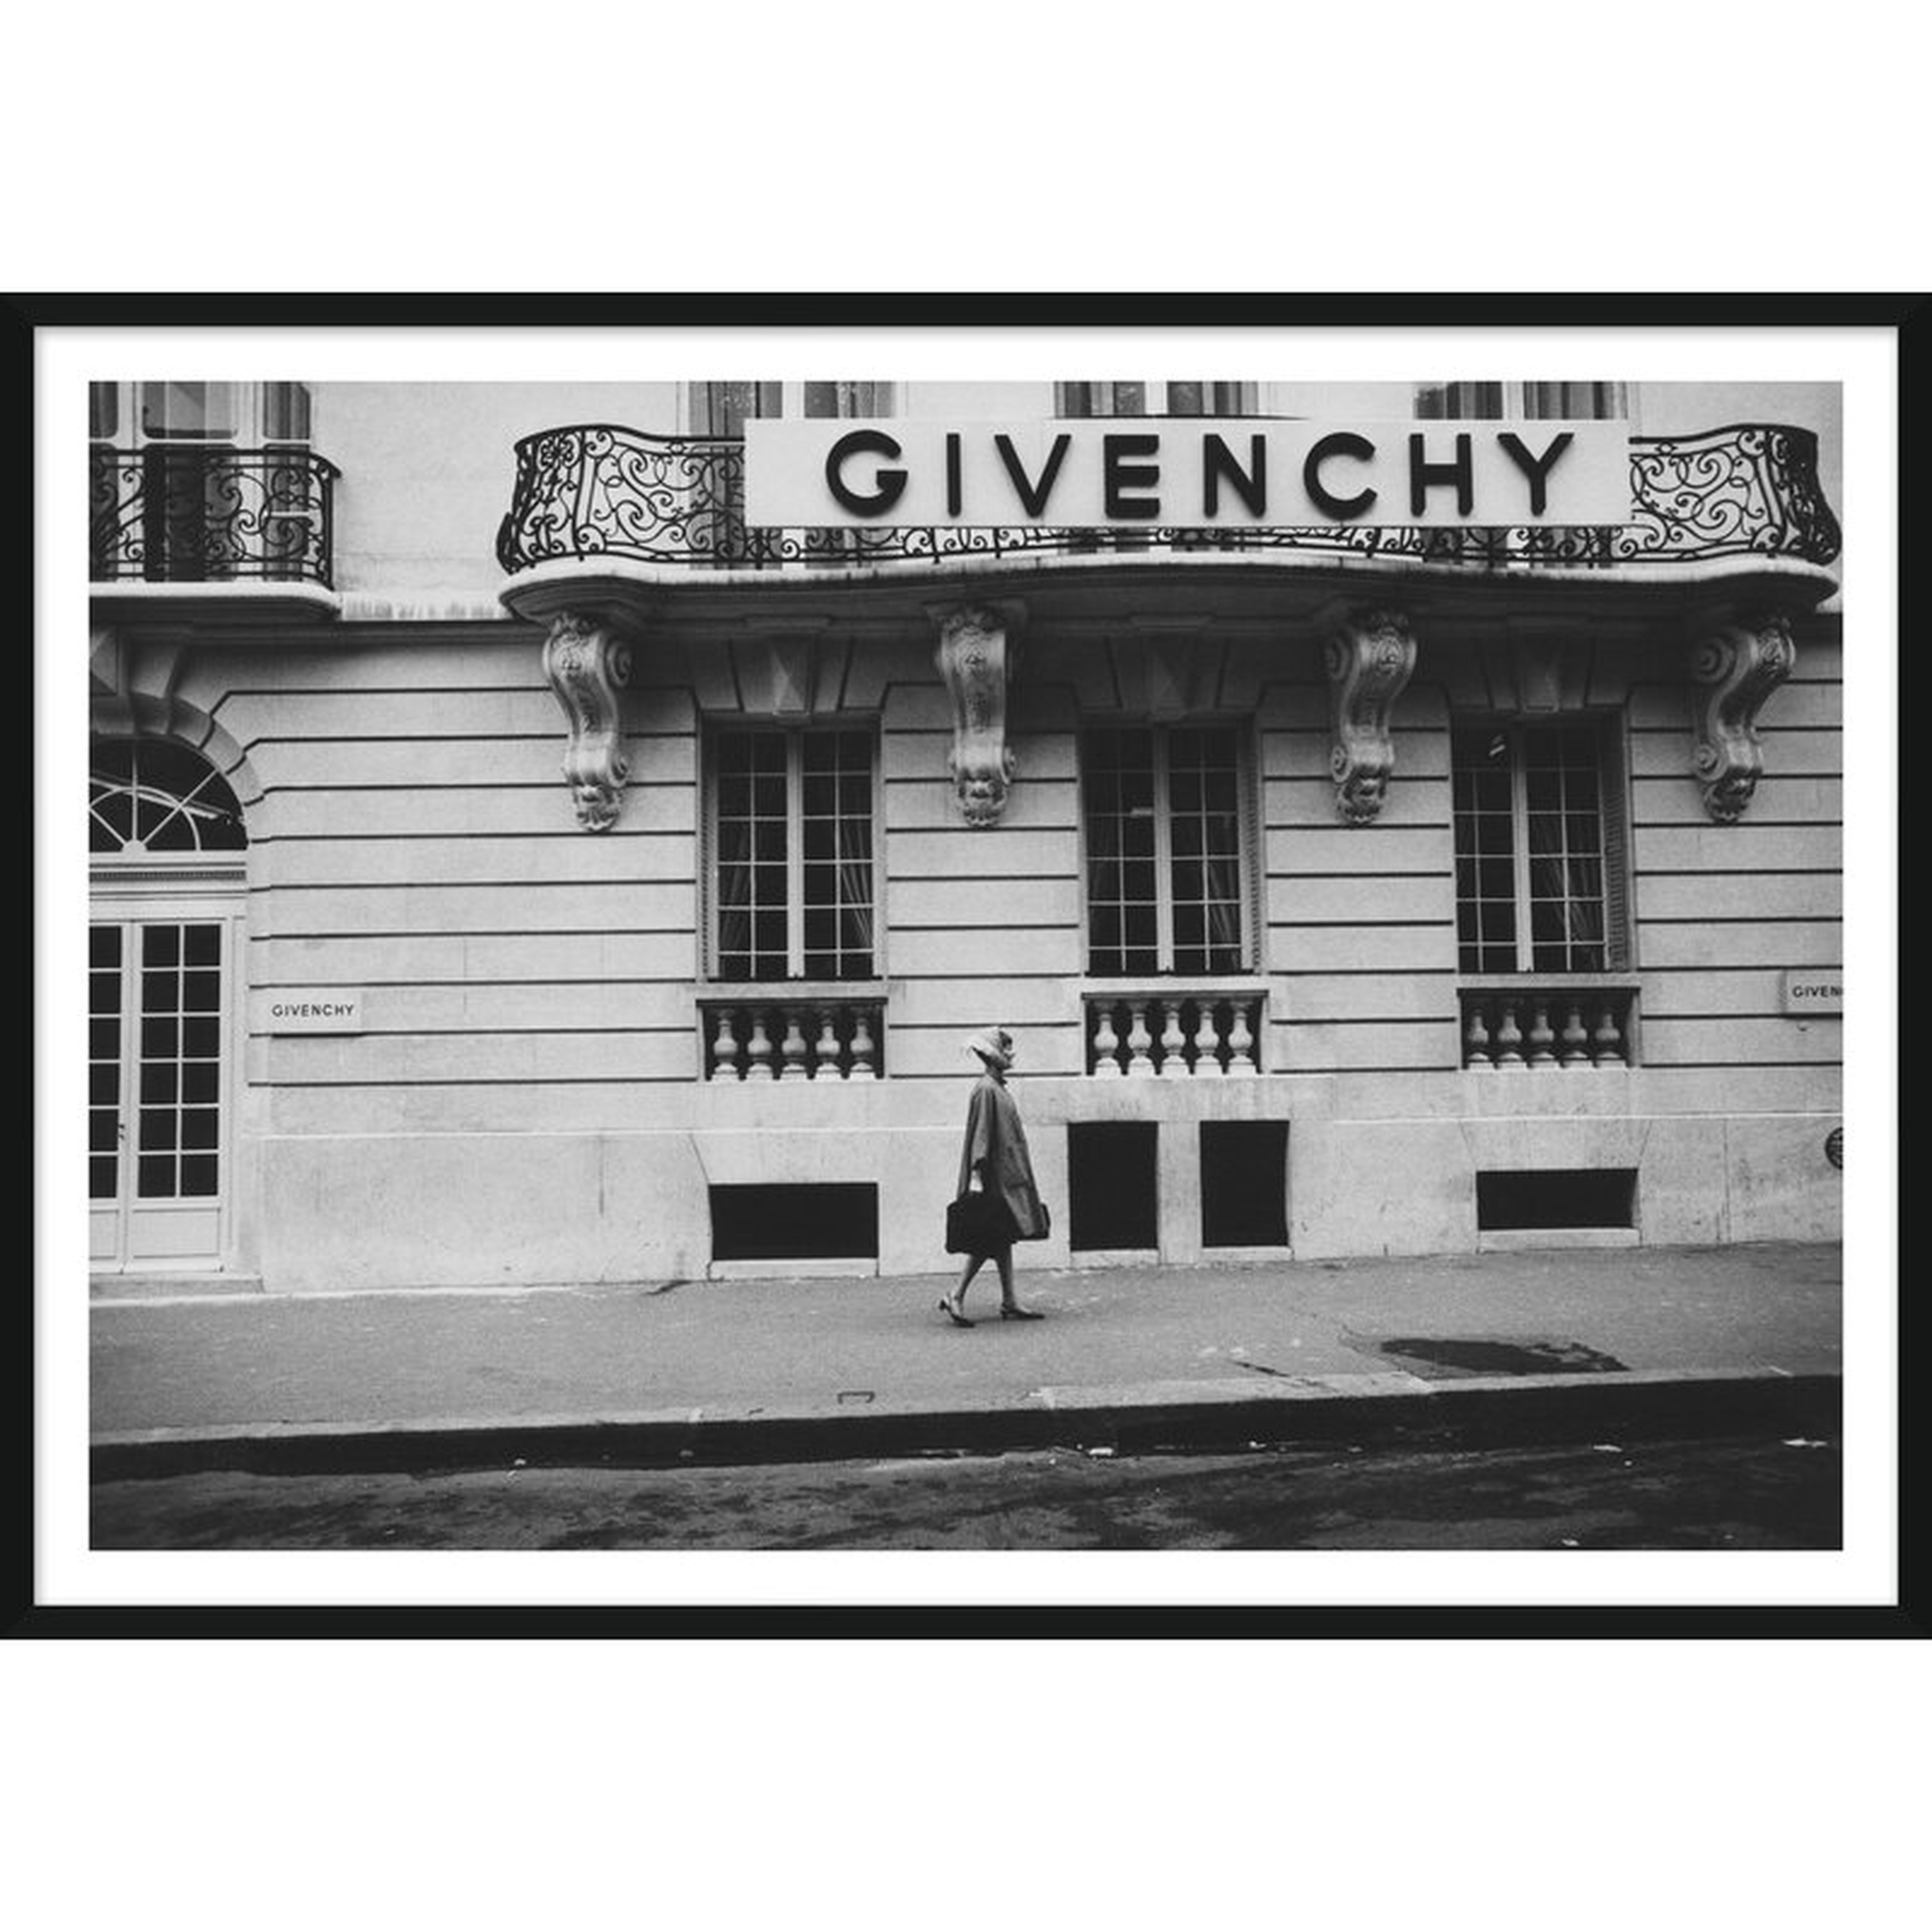 Soicher Marin 'Givenchy' by Russell Knight - Picture Frame Photograph on Paper - Perigold